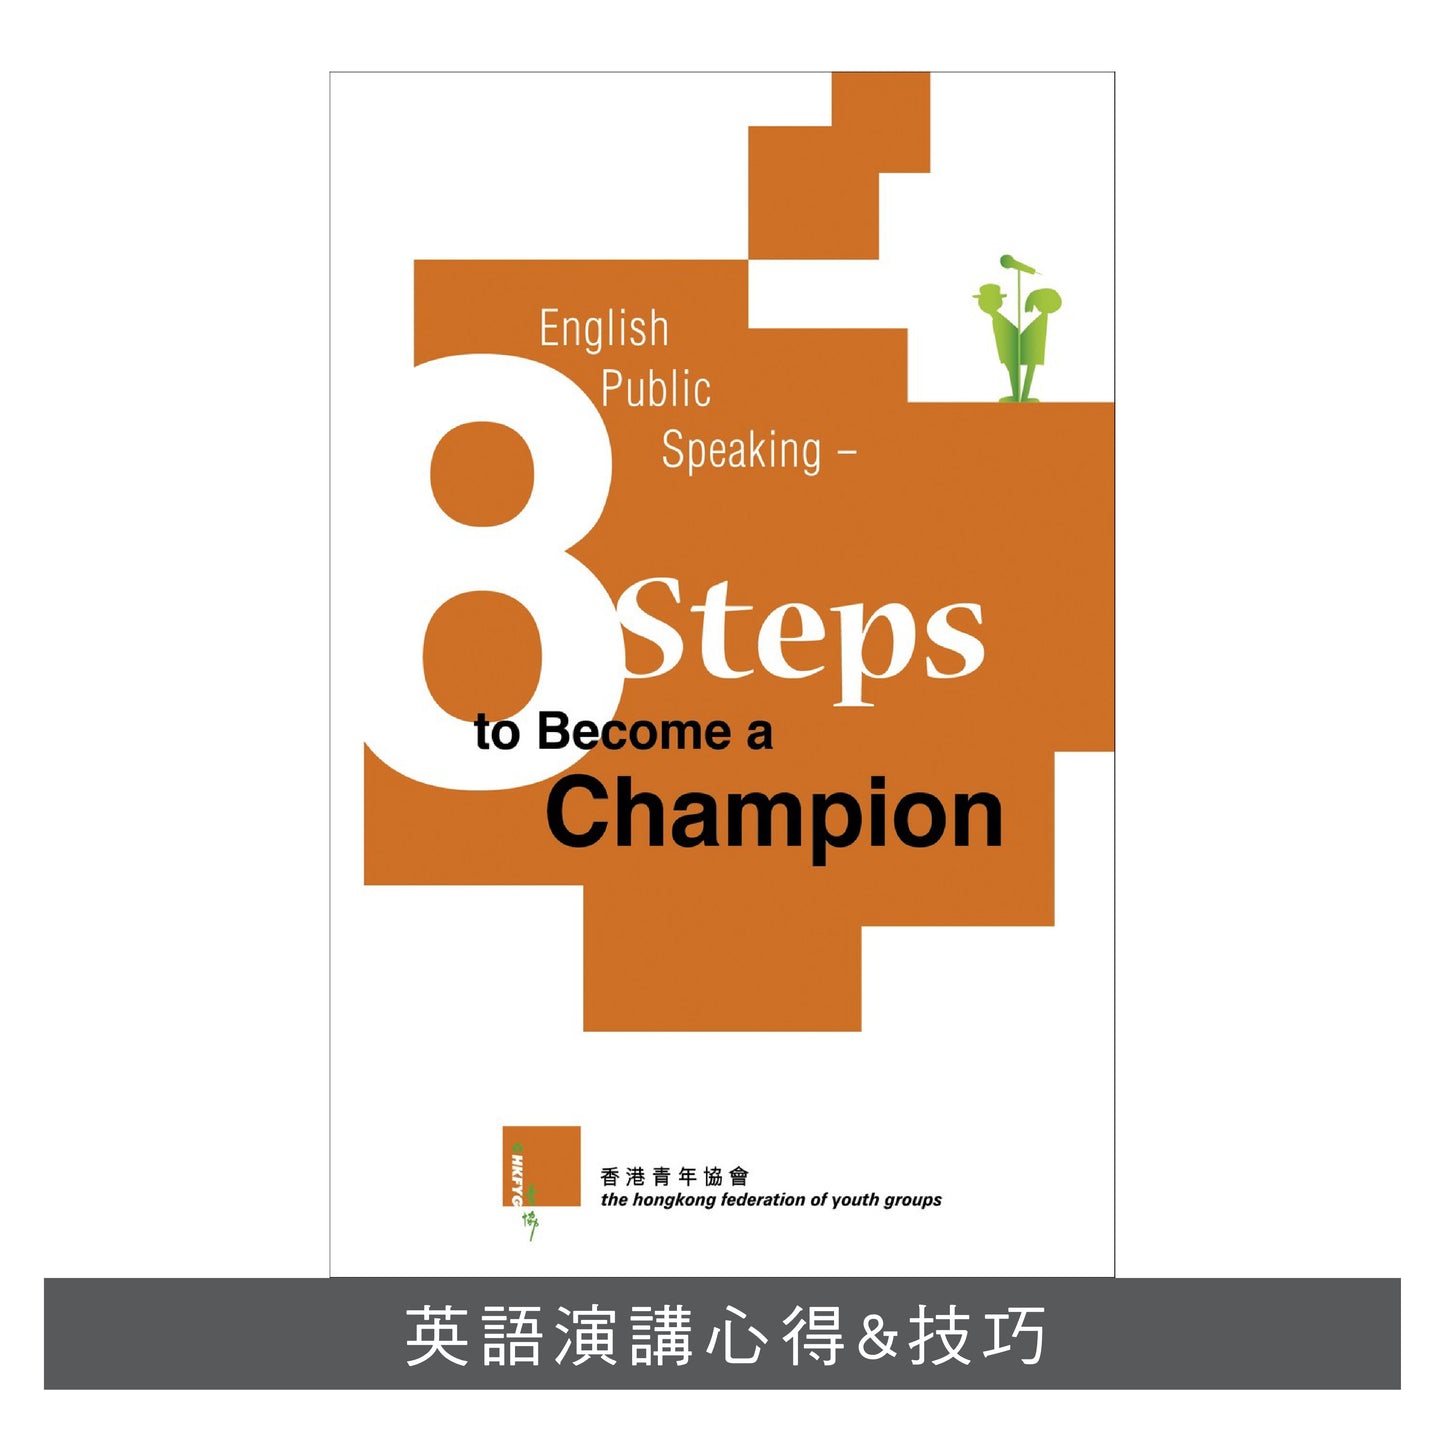 L201301：【English Public Speaking - 8 Steps to Become a Champion】